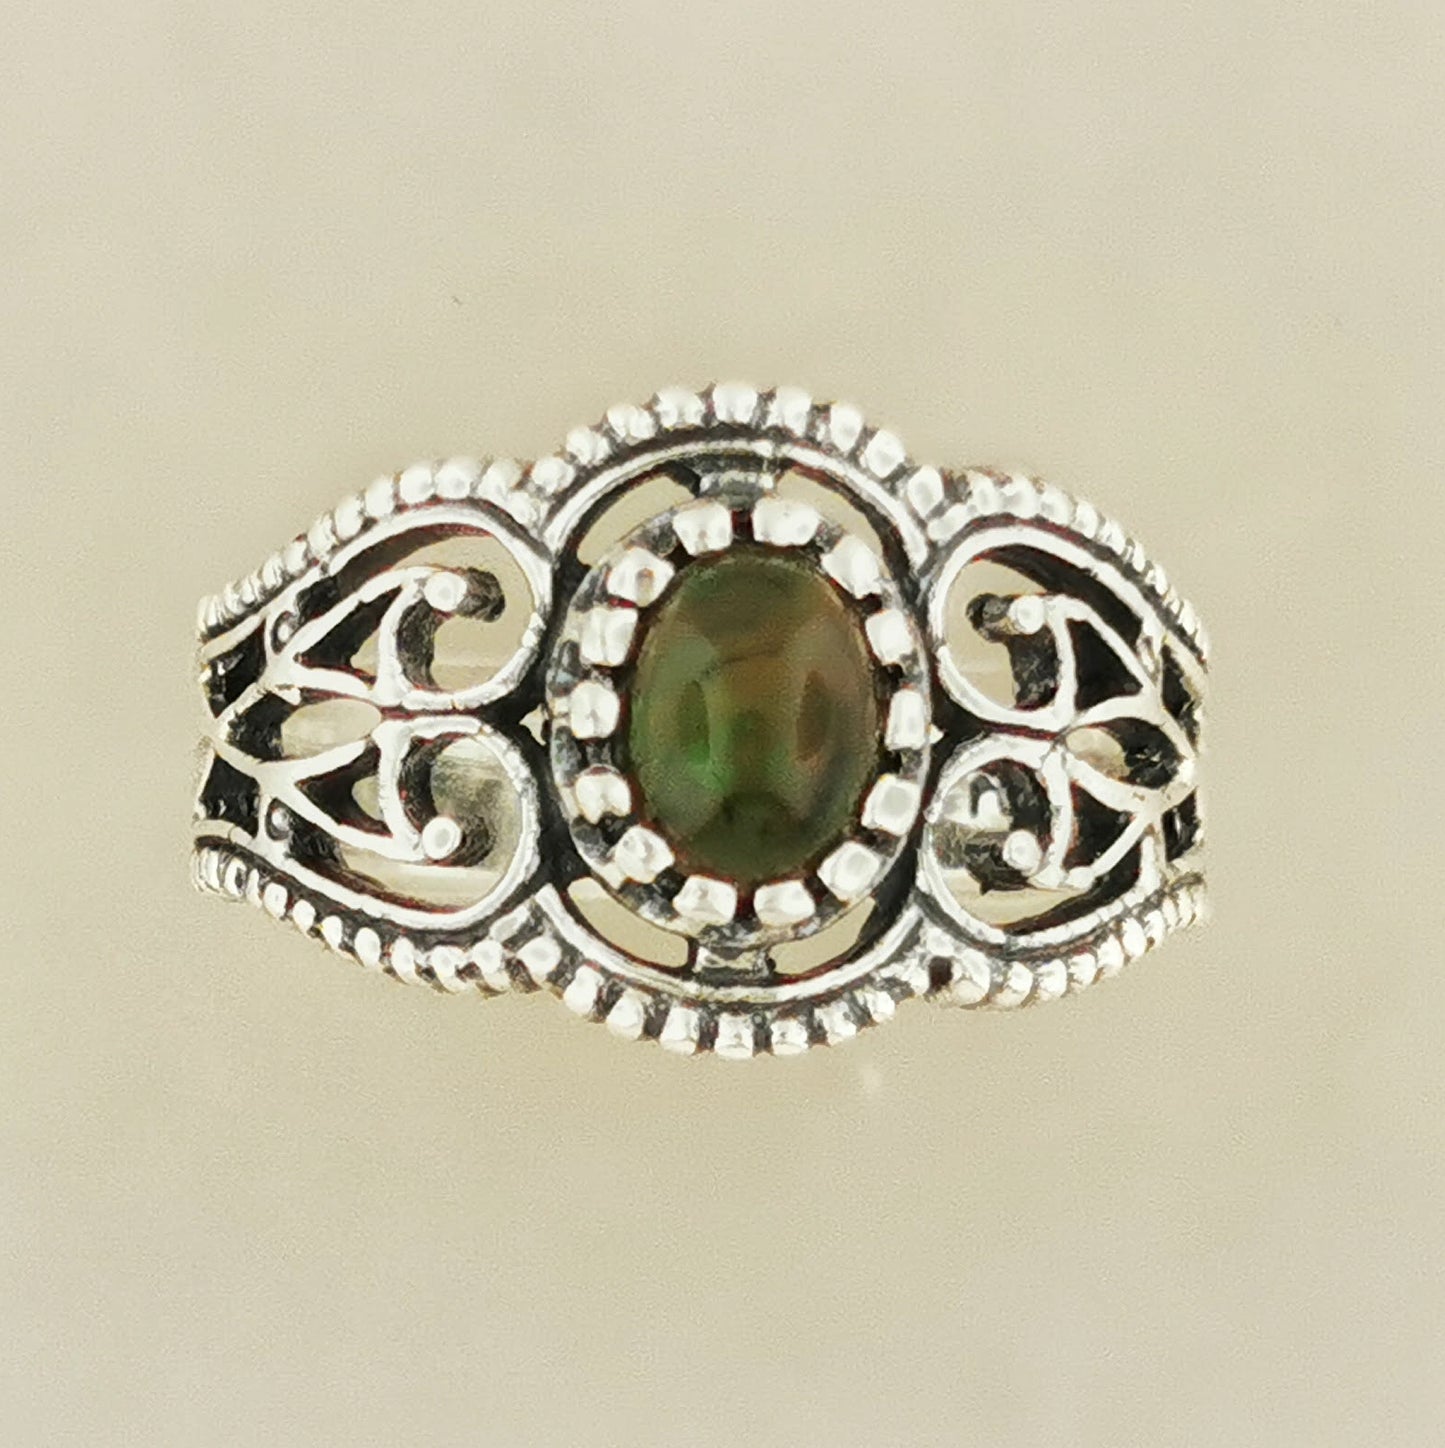 Filigree Ring with Ethiopian Opal in Sterling Silver or Antique Bronze, Gothic Opal Ring, Victorian Silver Ring, Ethiopean Opal Ring, Vintage Opal Ring, 925 Silver Gemstone Ring, 925 Opal Ring, Sterling Silver Opal Ring, Opal Ring In Sterling Silver